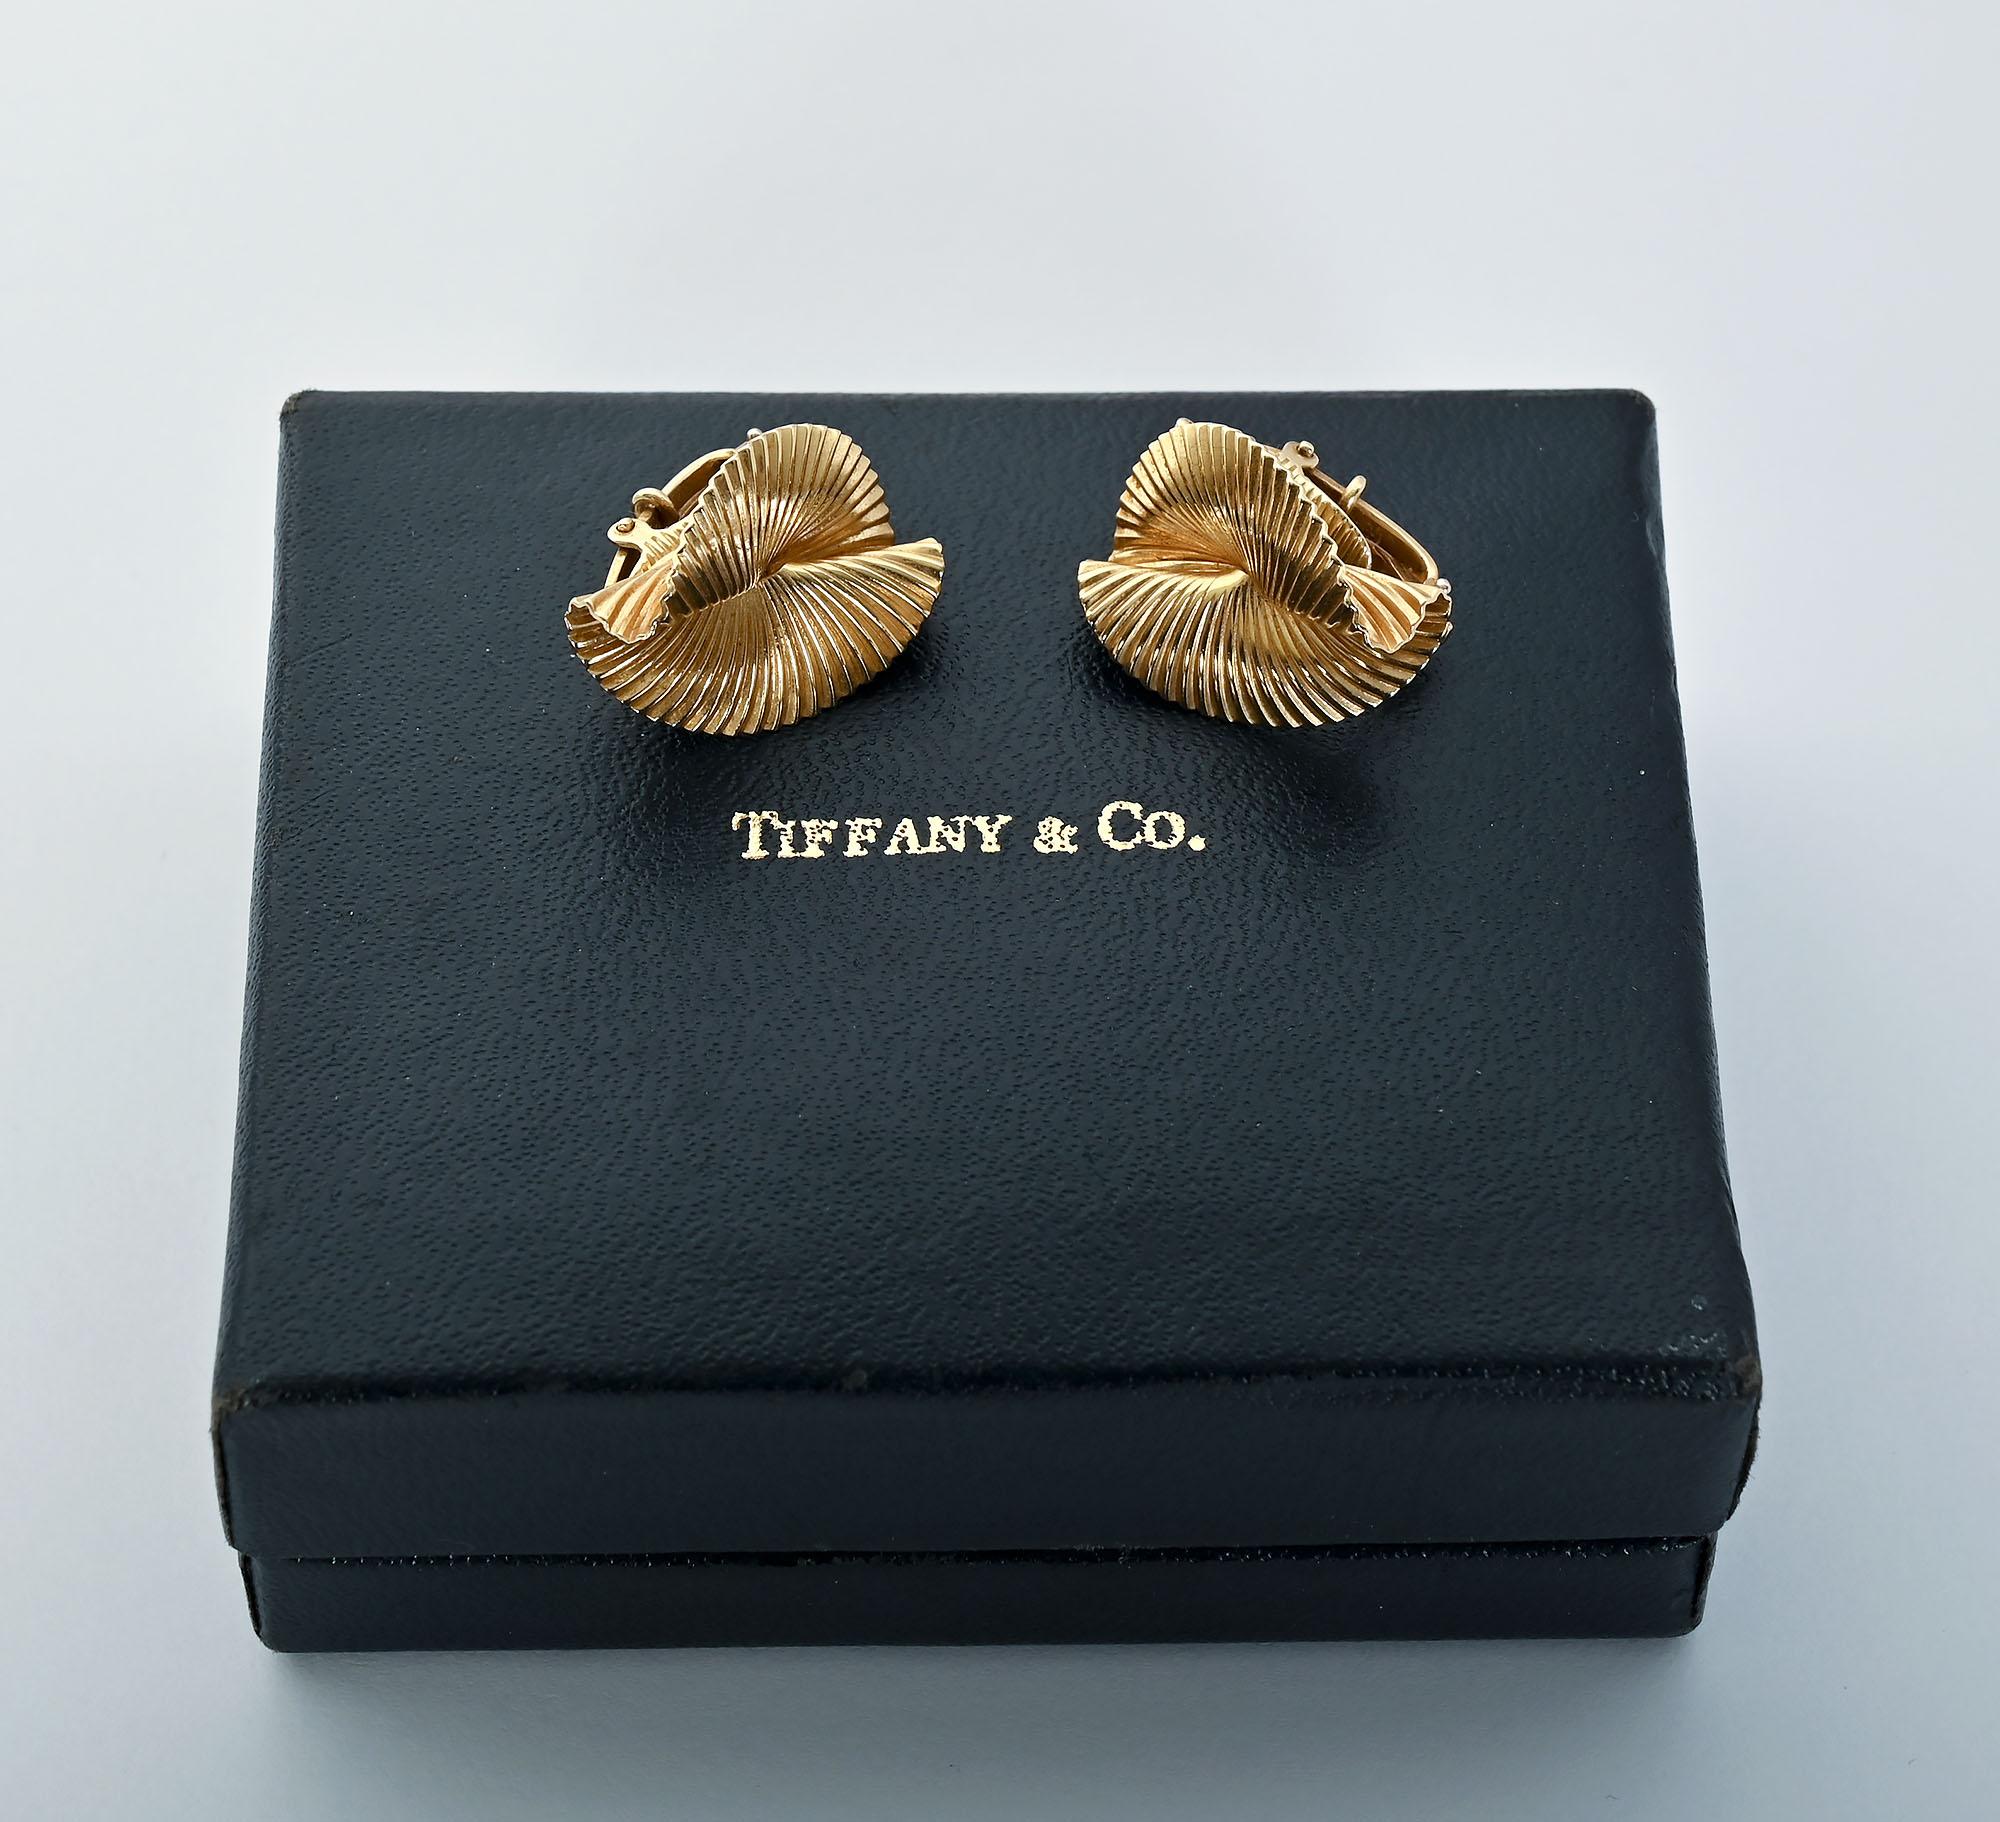 Classic Tiffany 14 karat gold earrings with a foldover design, a bit like origami.  The gold has a ribbed surface. The combination of the three dimensional shape as well as the texture make these earrings most interesting.
Clip backs can be